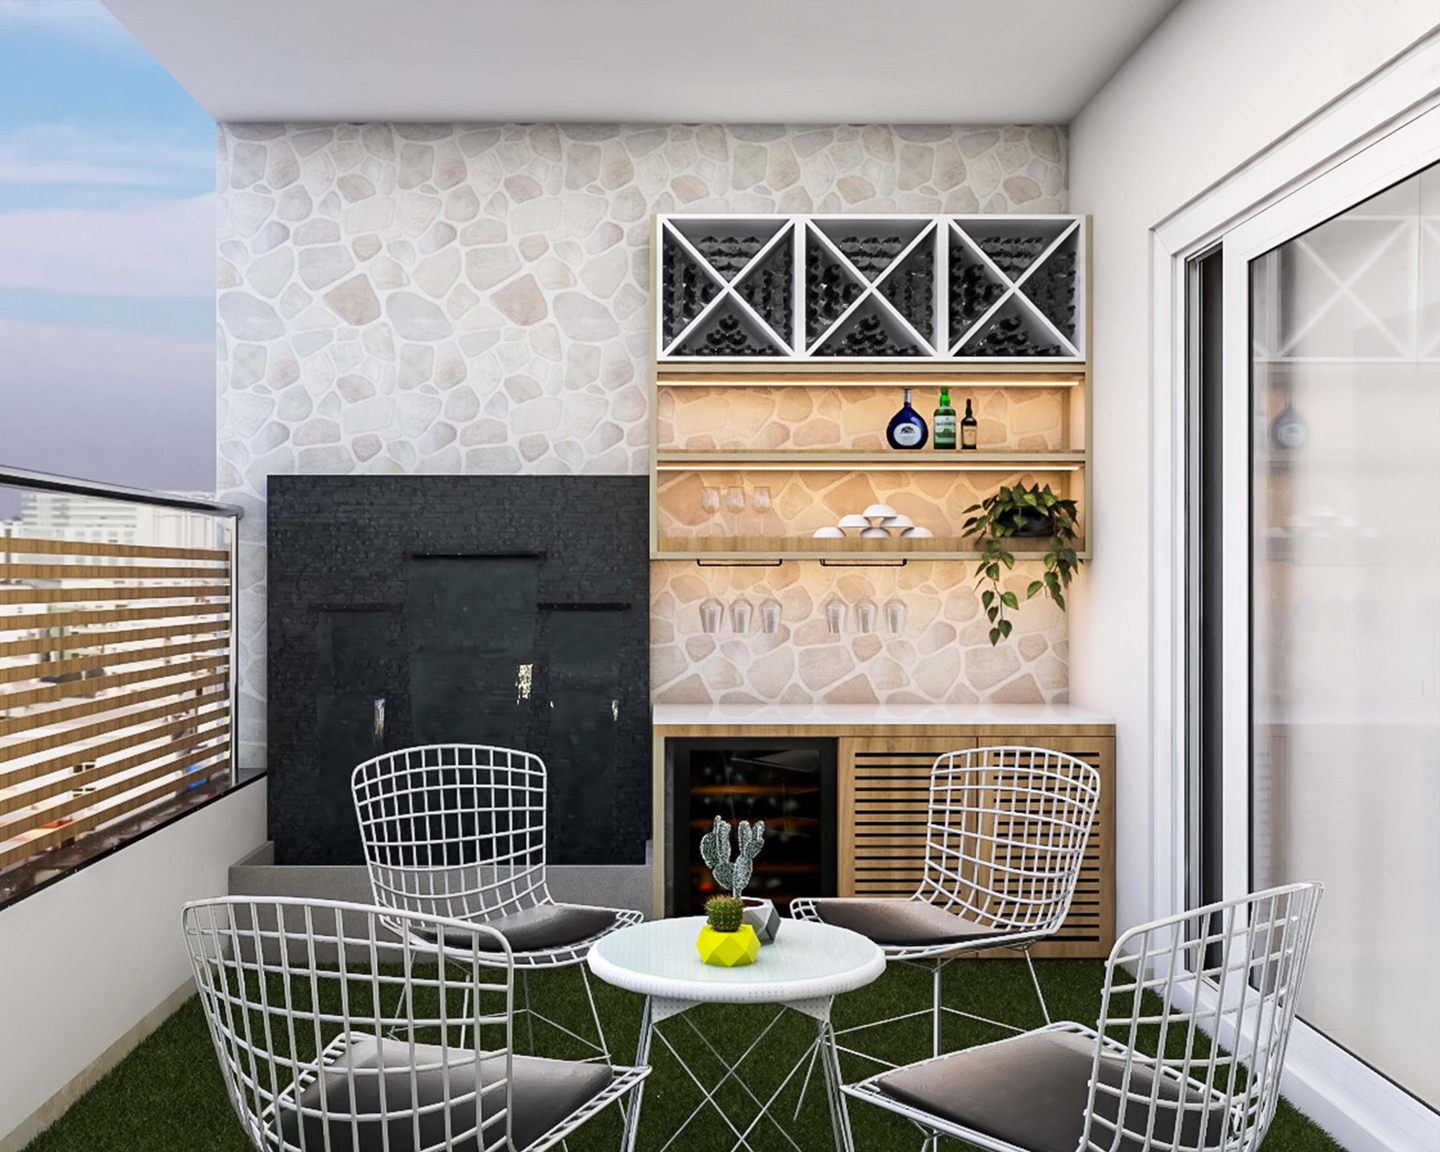 Compact Balcony Design With Bar Unit - Livspace